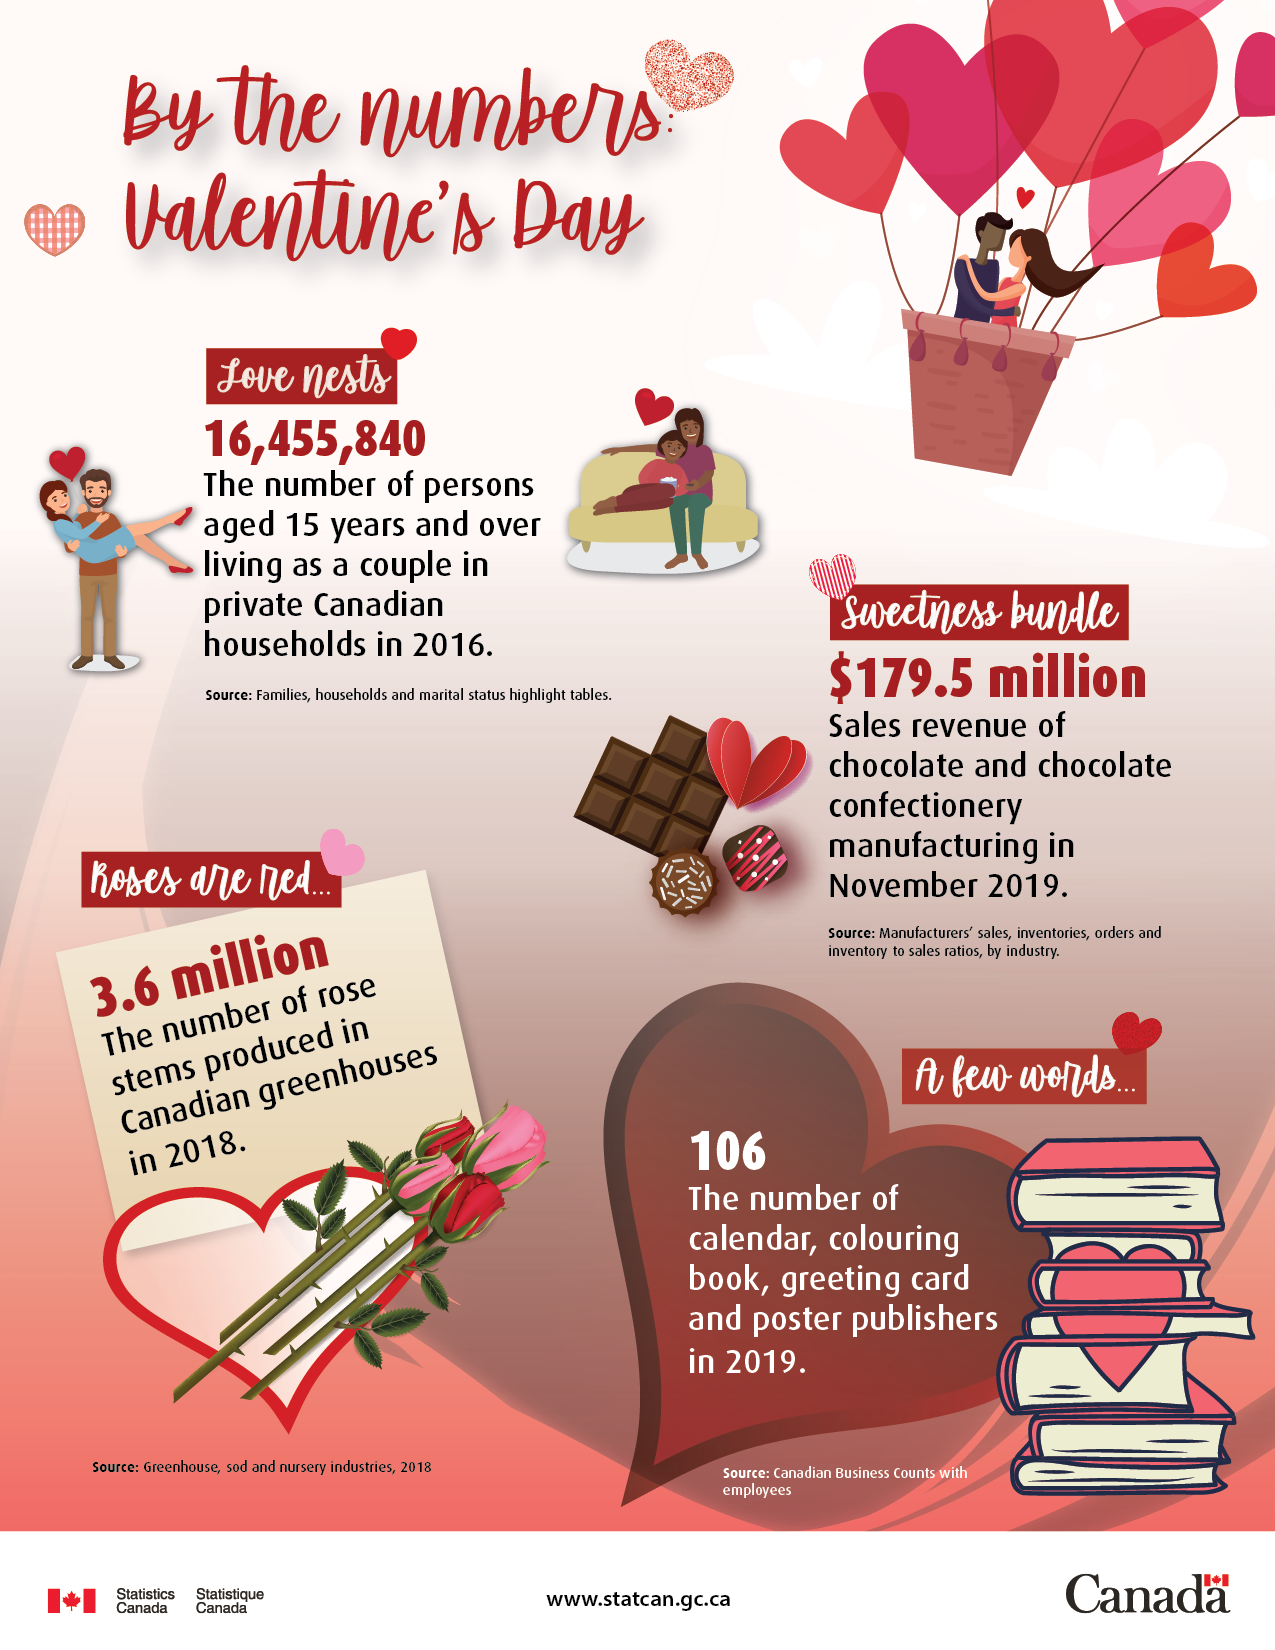 By the numbers: Valentine's Day